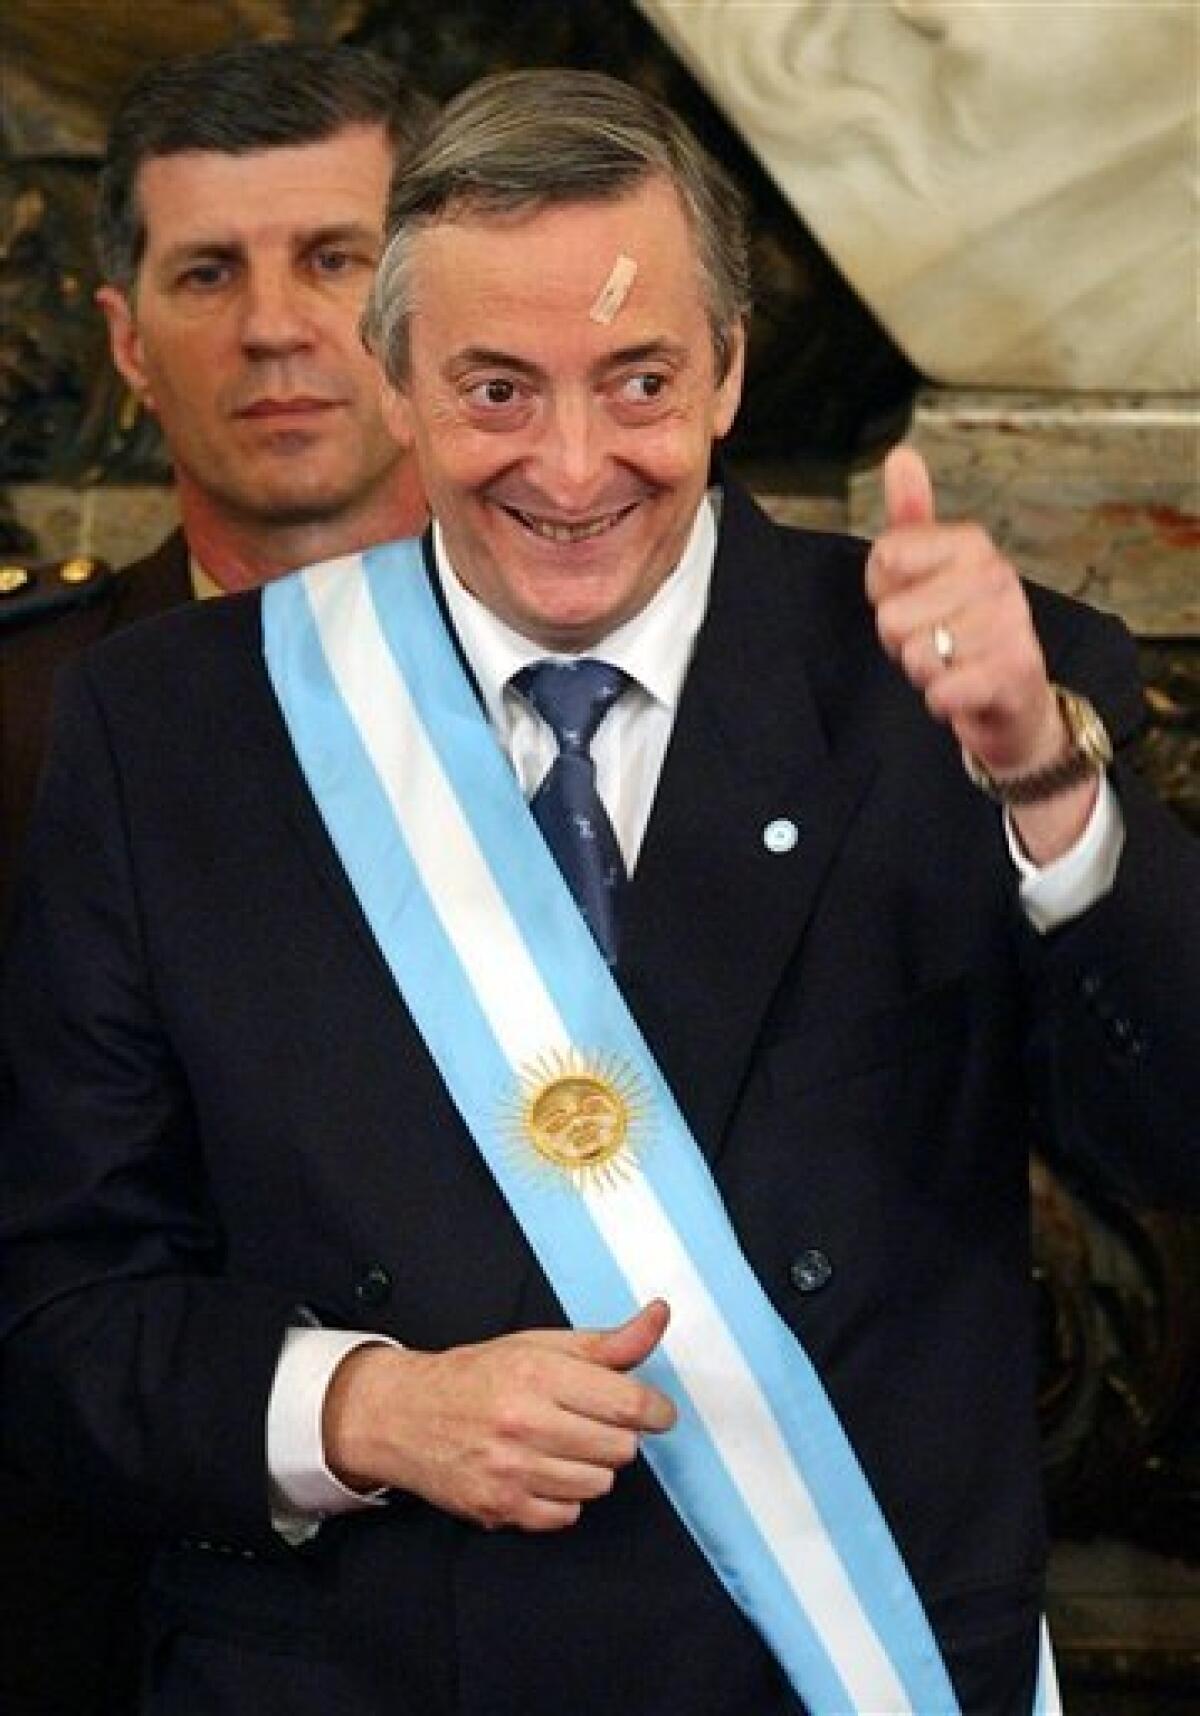 FILE - In this May 25, 2003 file photo, Argentina's President Nestor Kirchner gives a thumbs up after being sworn-in as president at the government palace in Buenos Aires, Argentina. According to state television in Argentina, Nestor Kirchner died on Wednesday Oct. 27, 2010 after suffering heart attacks at age 60. Kirchner served as president from 2003-2007. (AP Photo/Ezequiel Pontoriero, File)